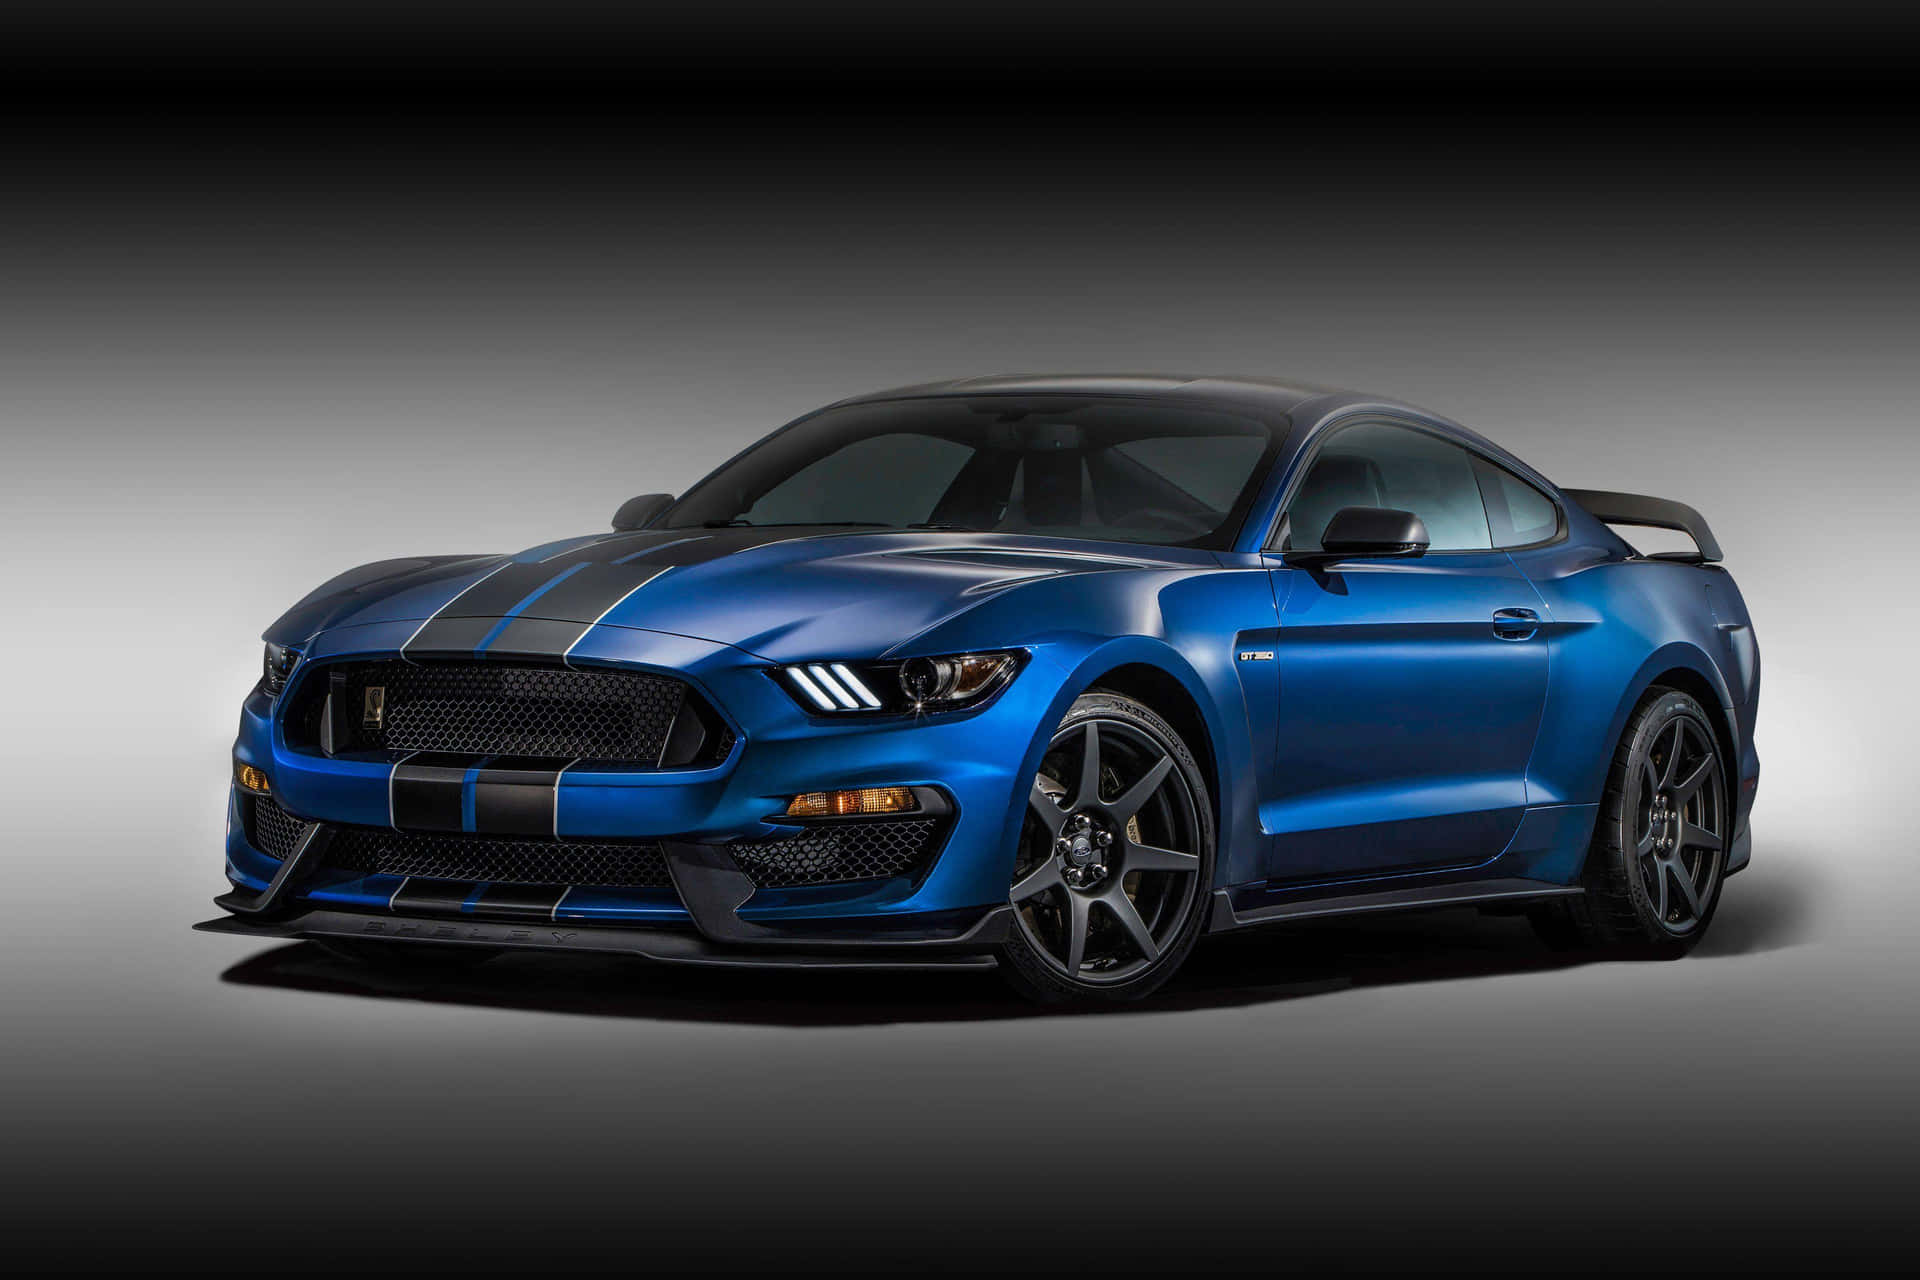 Caption: Majestic Ford Mustang Gt350r: Elegance Meets Power Wallpaper